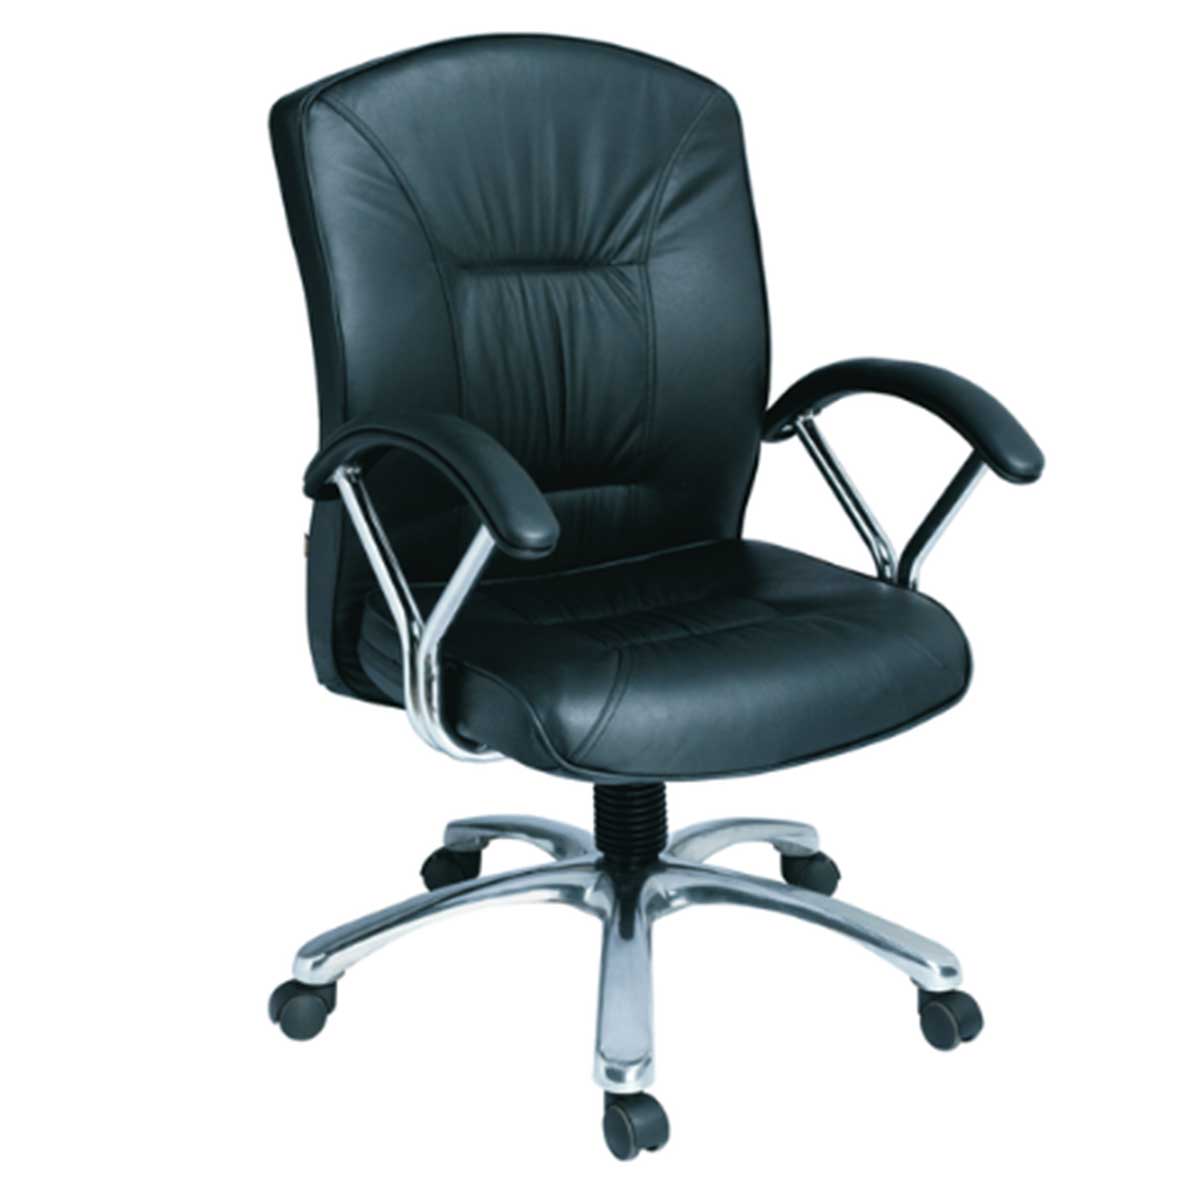 Executive Chair Manufacturers, Suppliers in Alaknanda